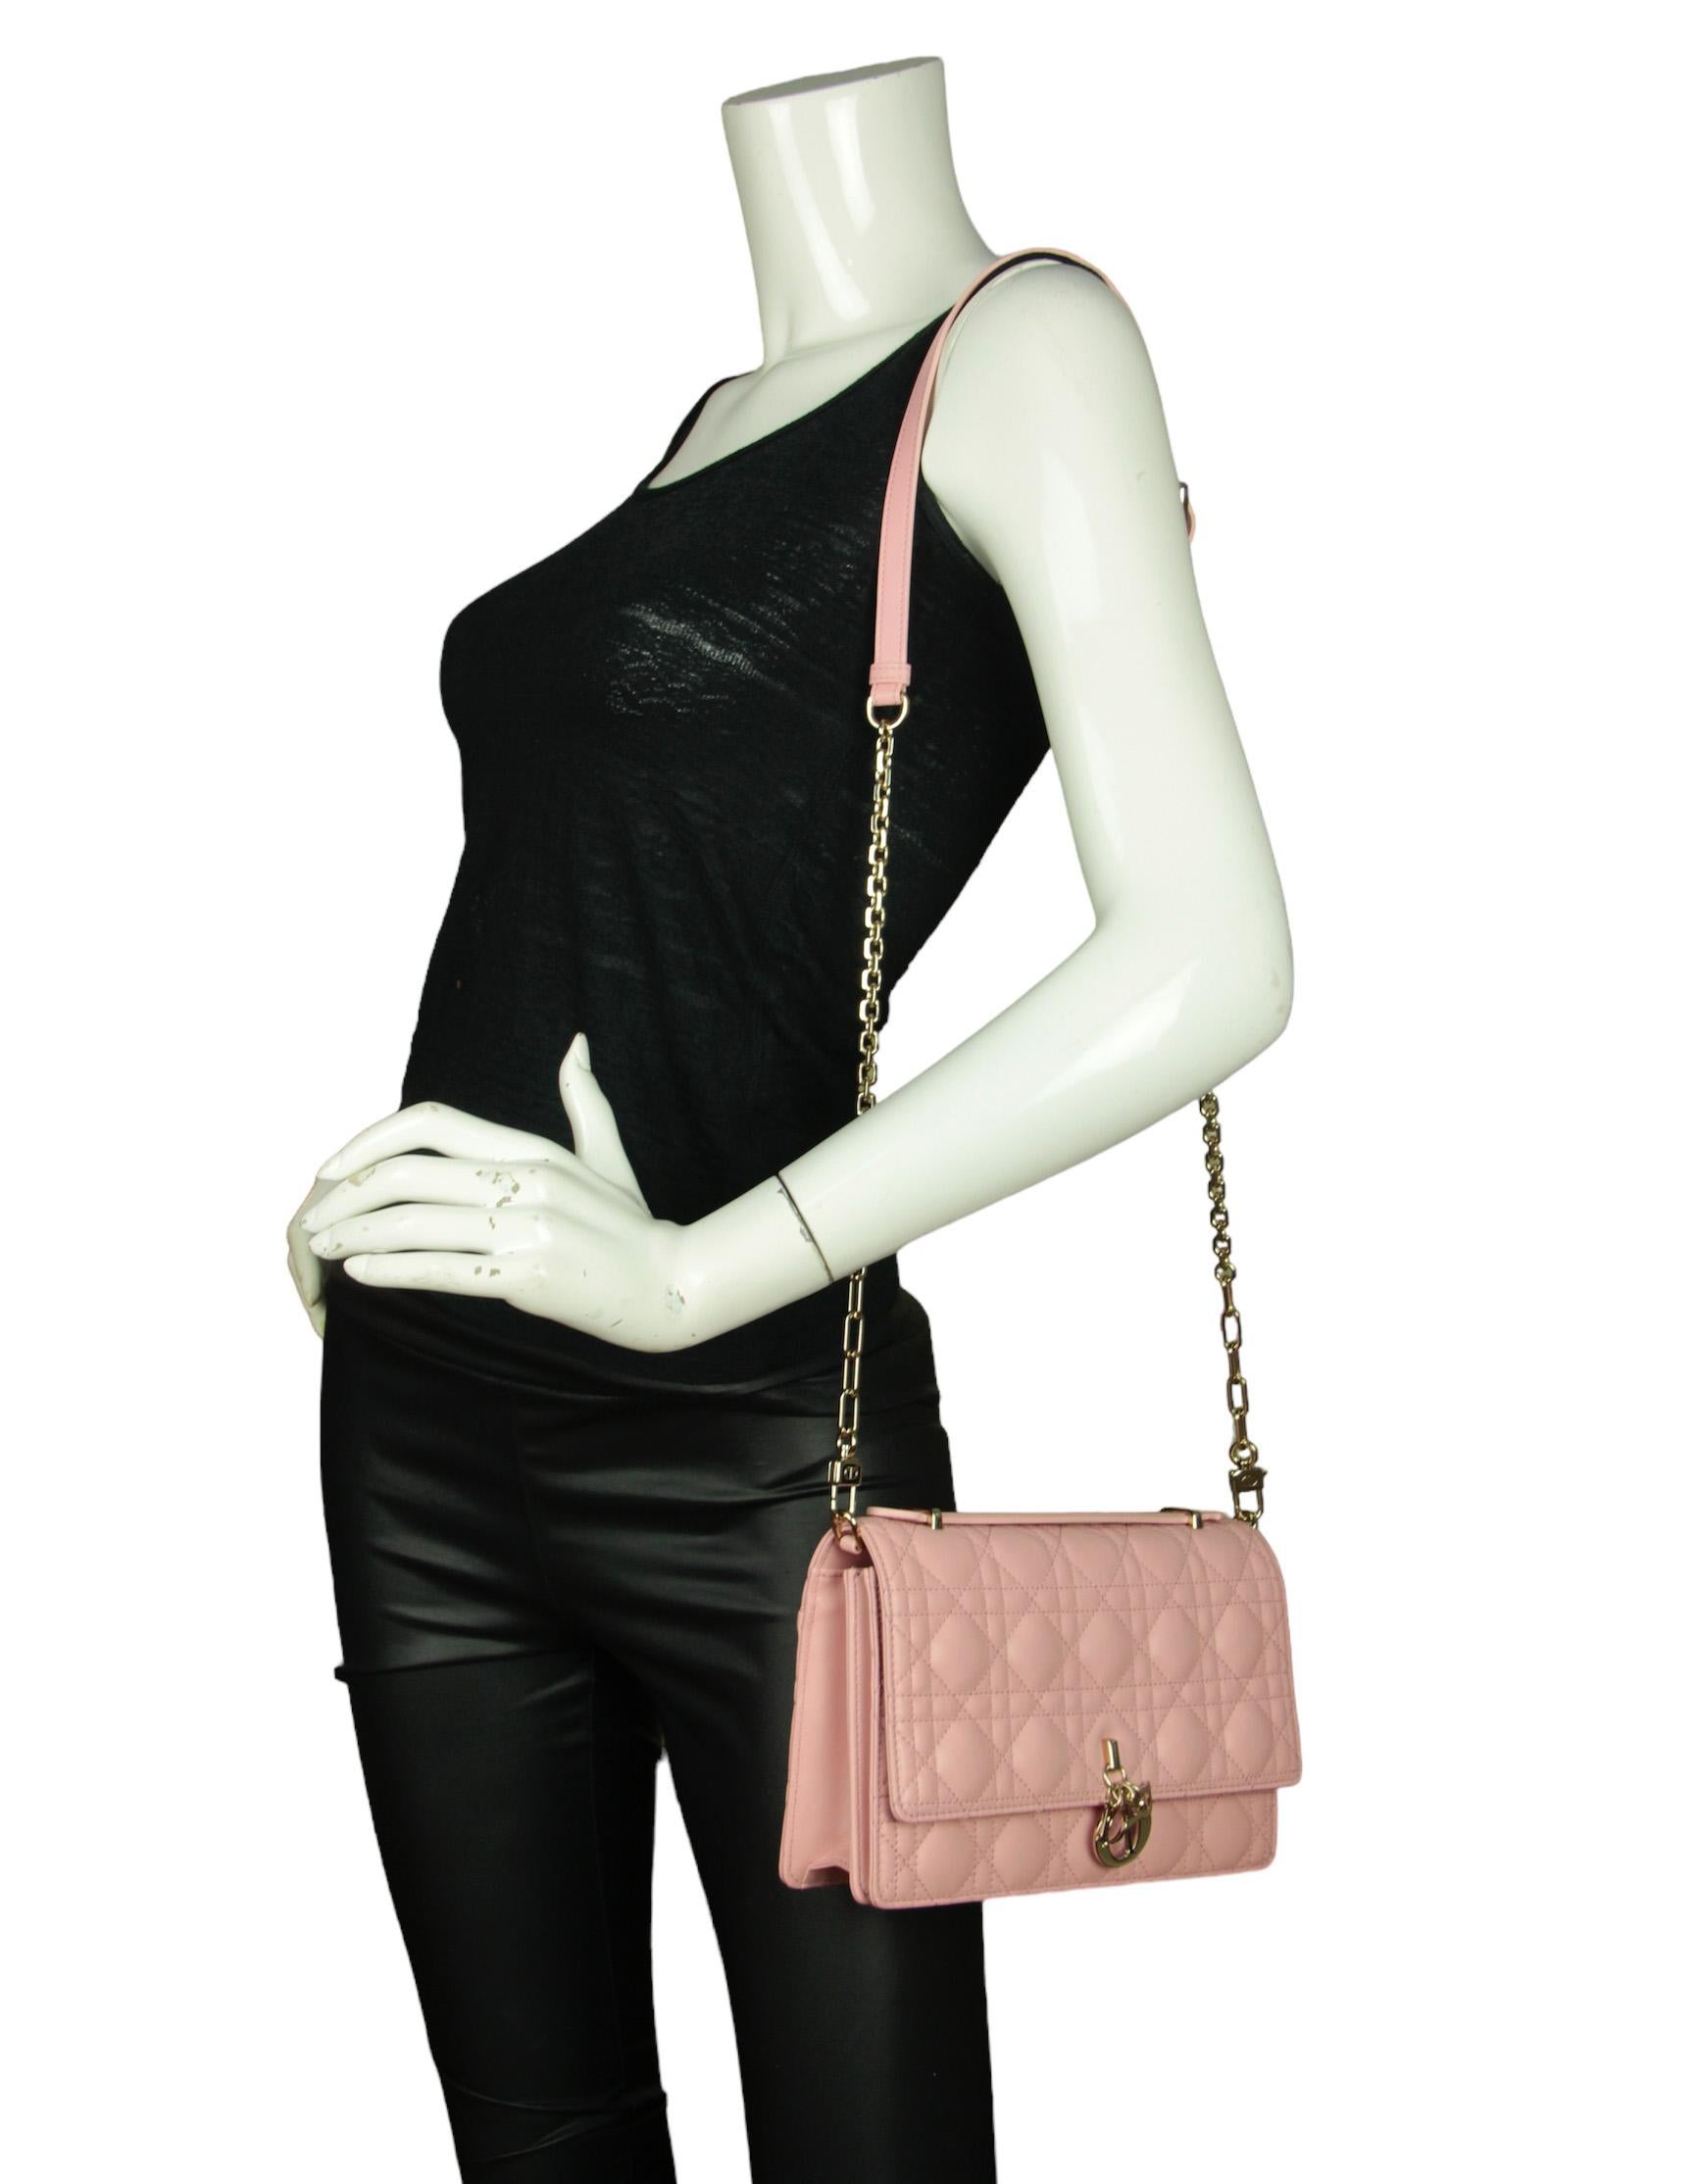 Christian Dior Melocoton Pink Cannage Lambskin Miss Dior Top Handle Bag. Bag can be worn as clutch, top handle, or with shoulder strap. 

Made In: Italy
Year of Production: 2023
Color: Melocoton Pink
Hardware: Pale goldtone
Materials: Lambskin